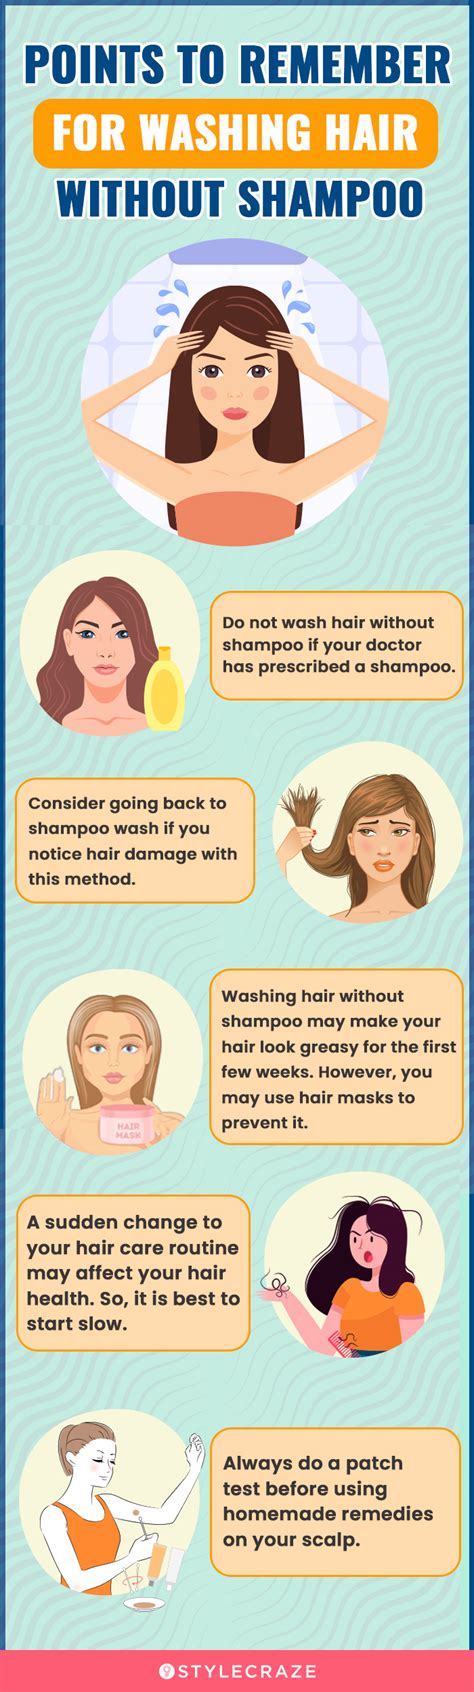 Is it OK to wash hair without shampoo?